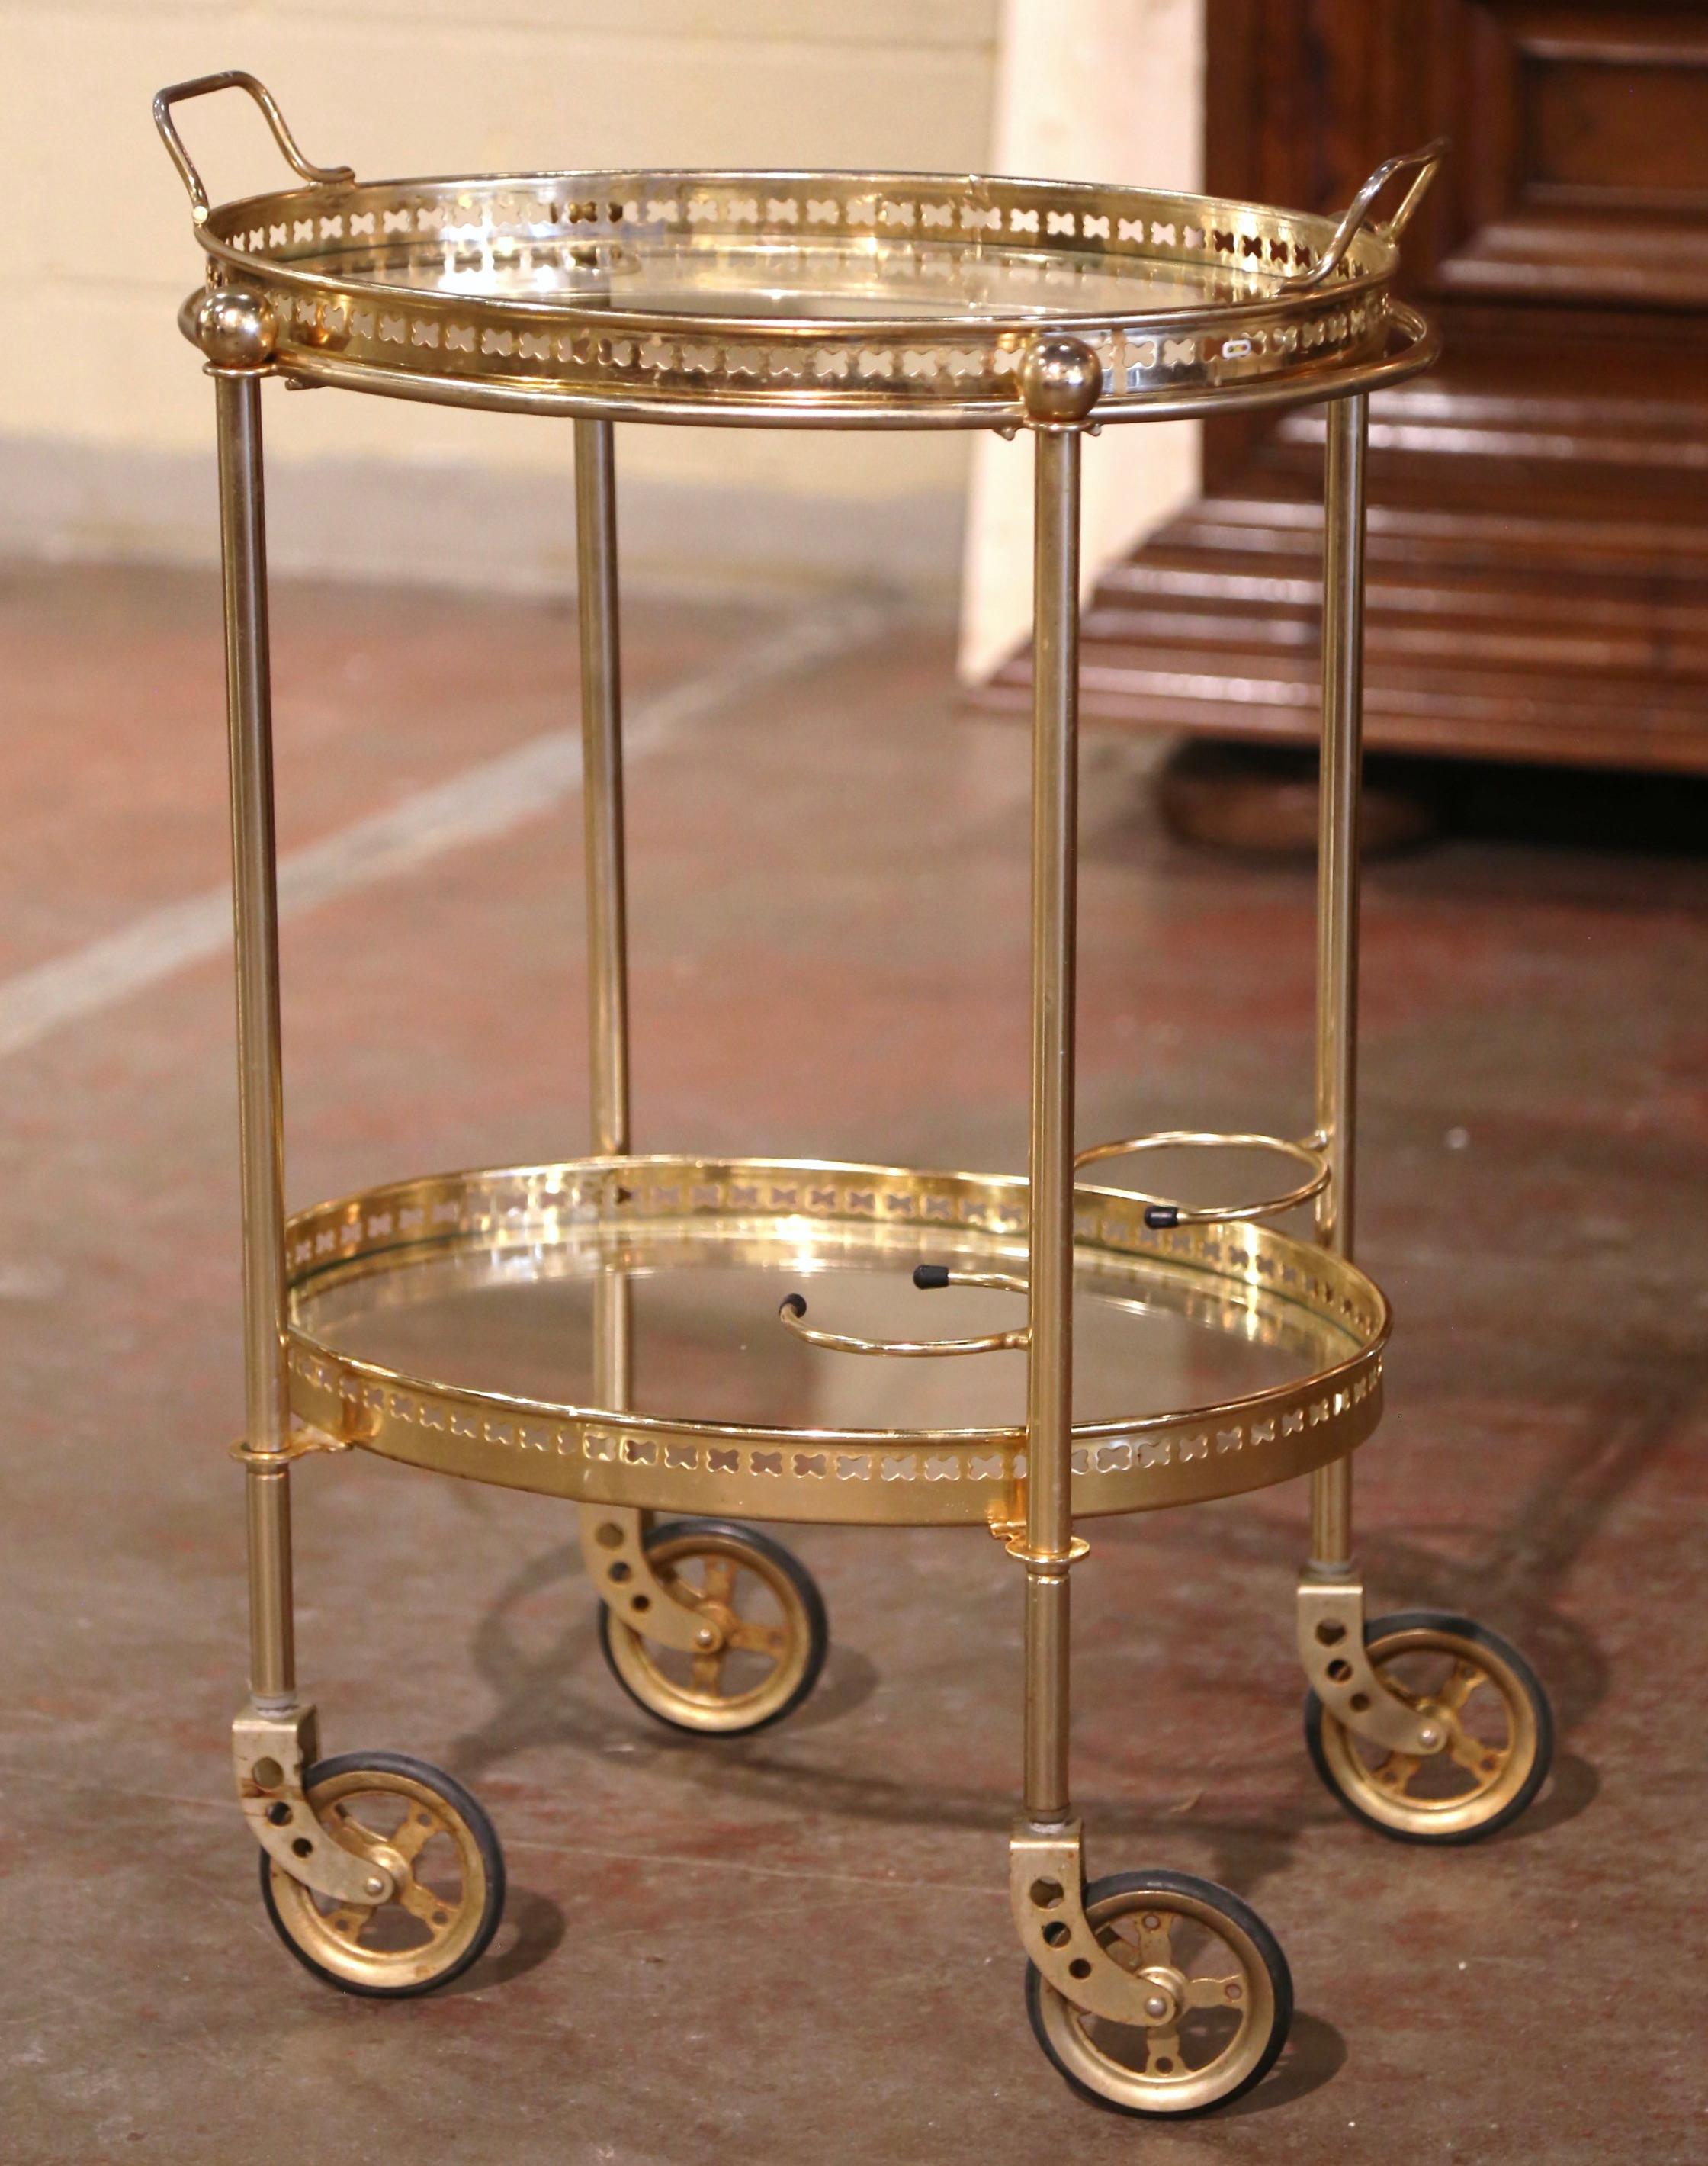 This elegant vintage rolling bar cart was created in France, circa 1960. Built in brass and oval in shape, the two-tier dessert table stands on small round wheels with rubber tires, over two plateaus topped with glass surfaces. The top deck features